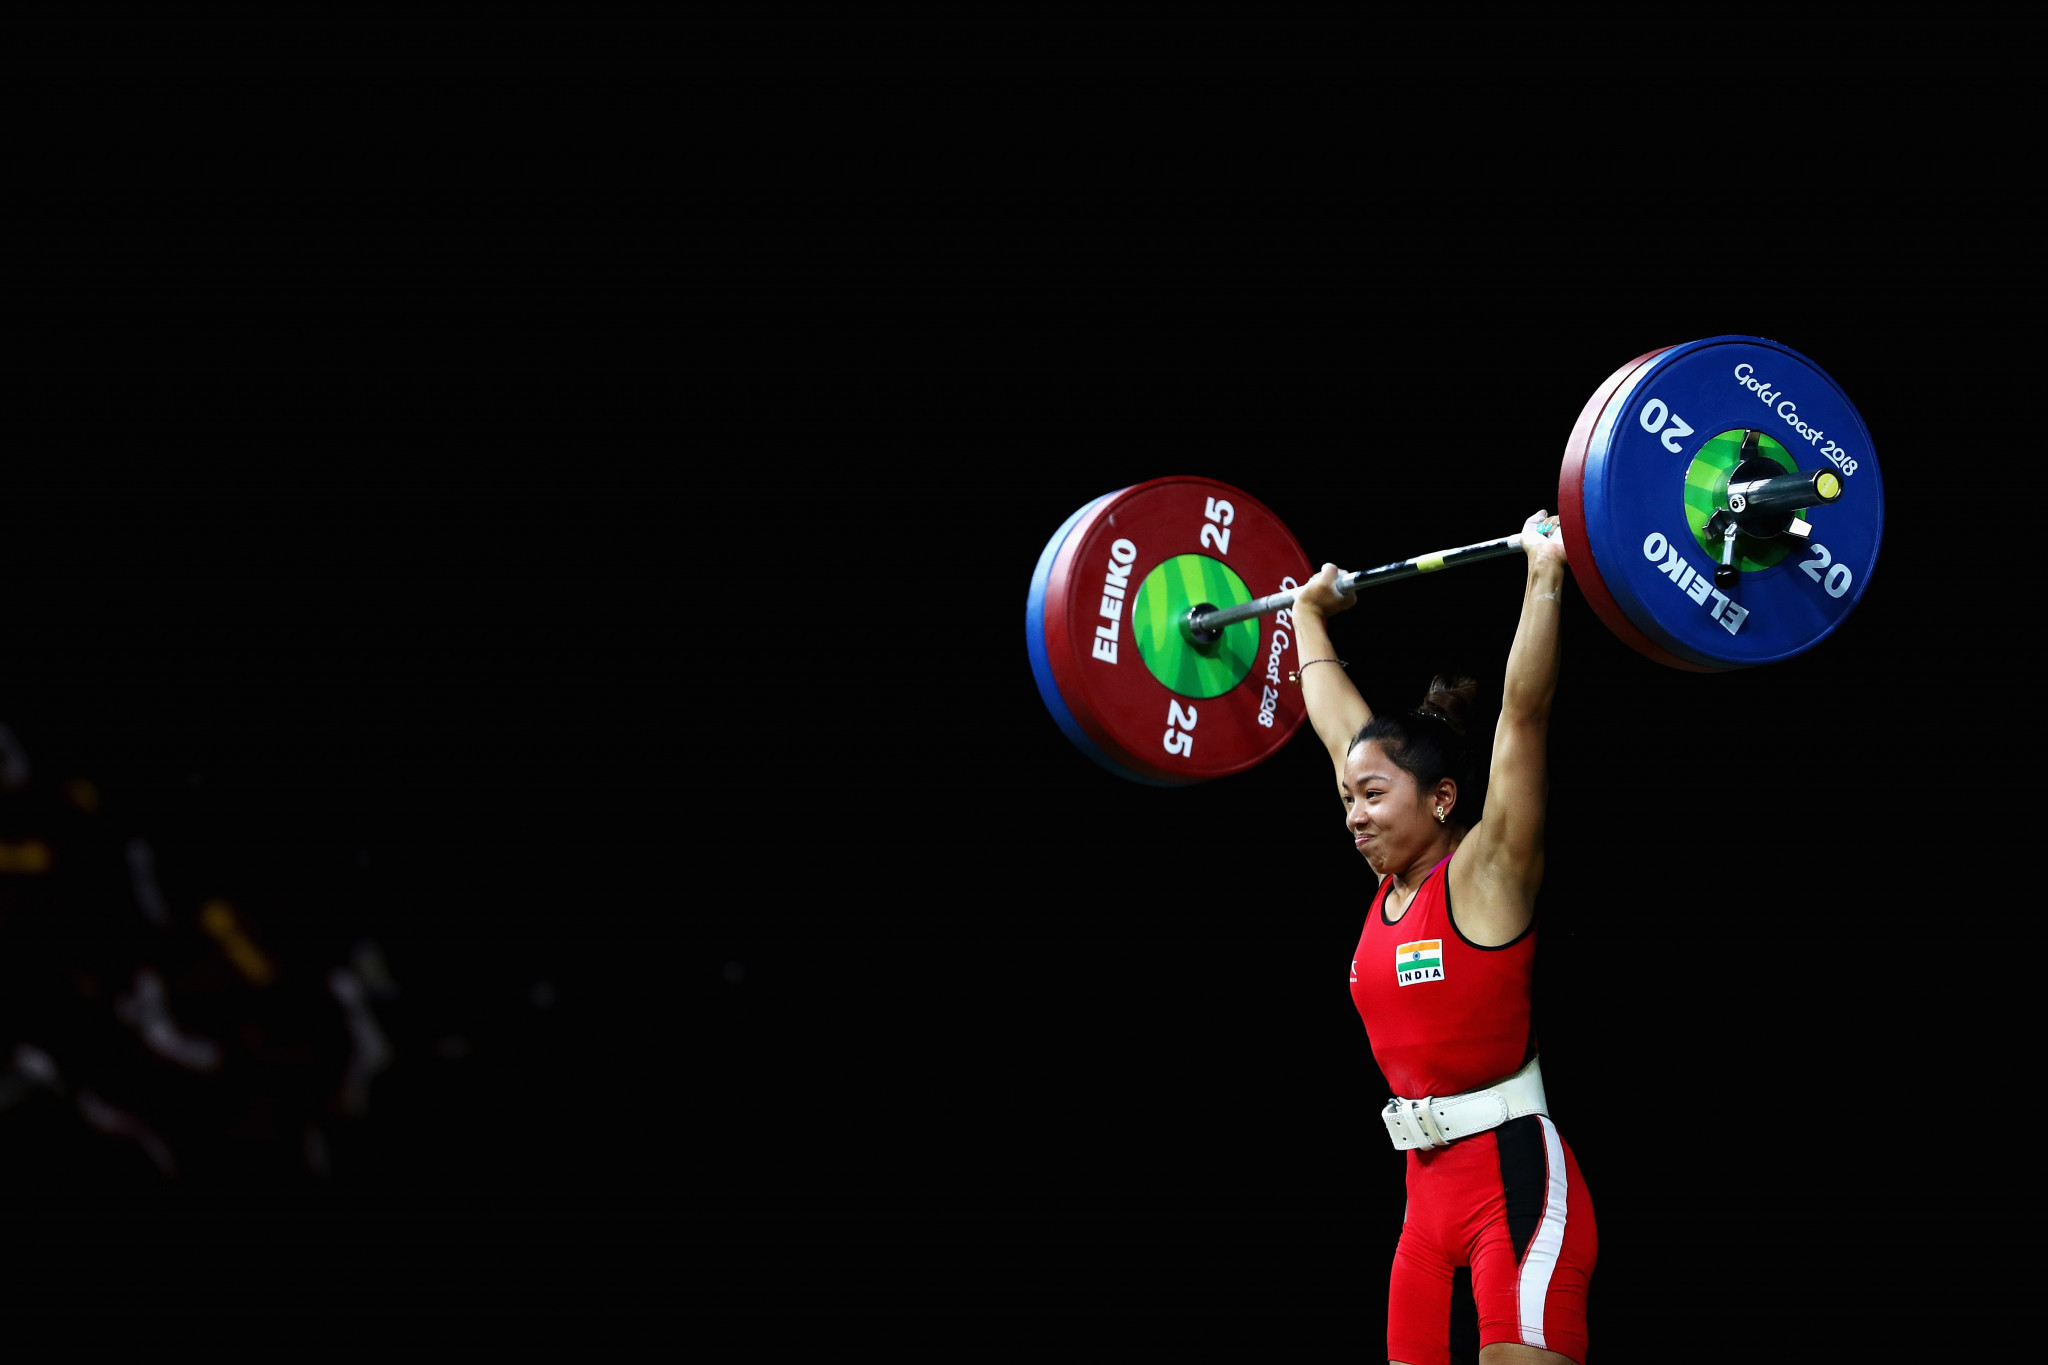 Chanu Saikhom Mirabai claimed India’s first gold medal of Gold Coast 2018 after winning the women's 48 kilograms weightlifting event with a Commonwealth record ©Getty Images